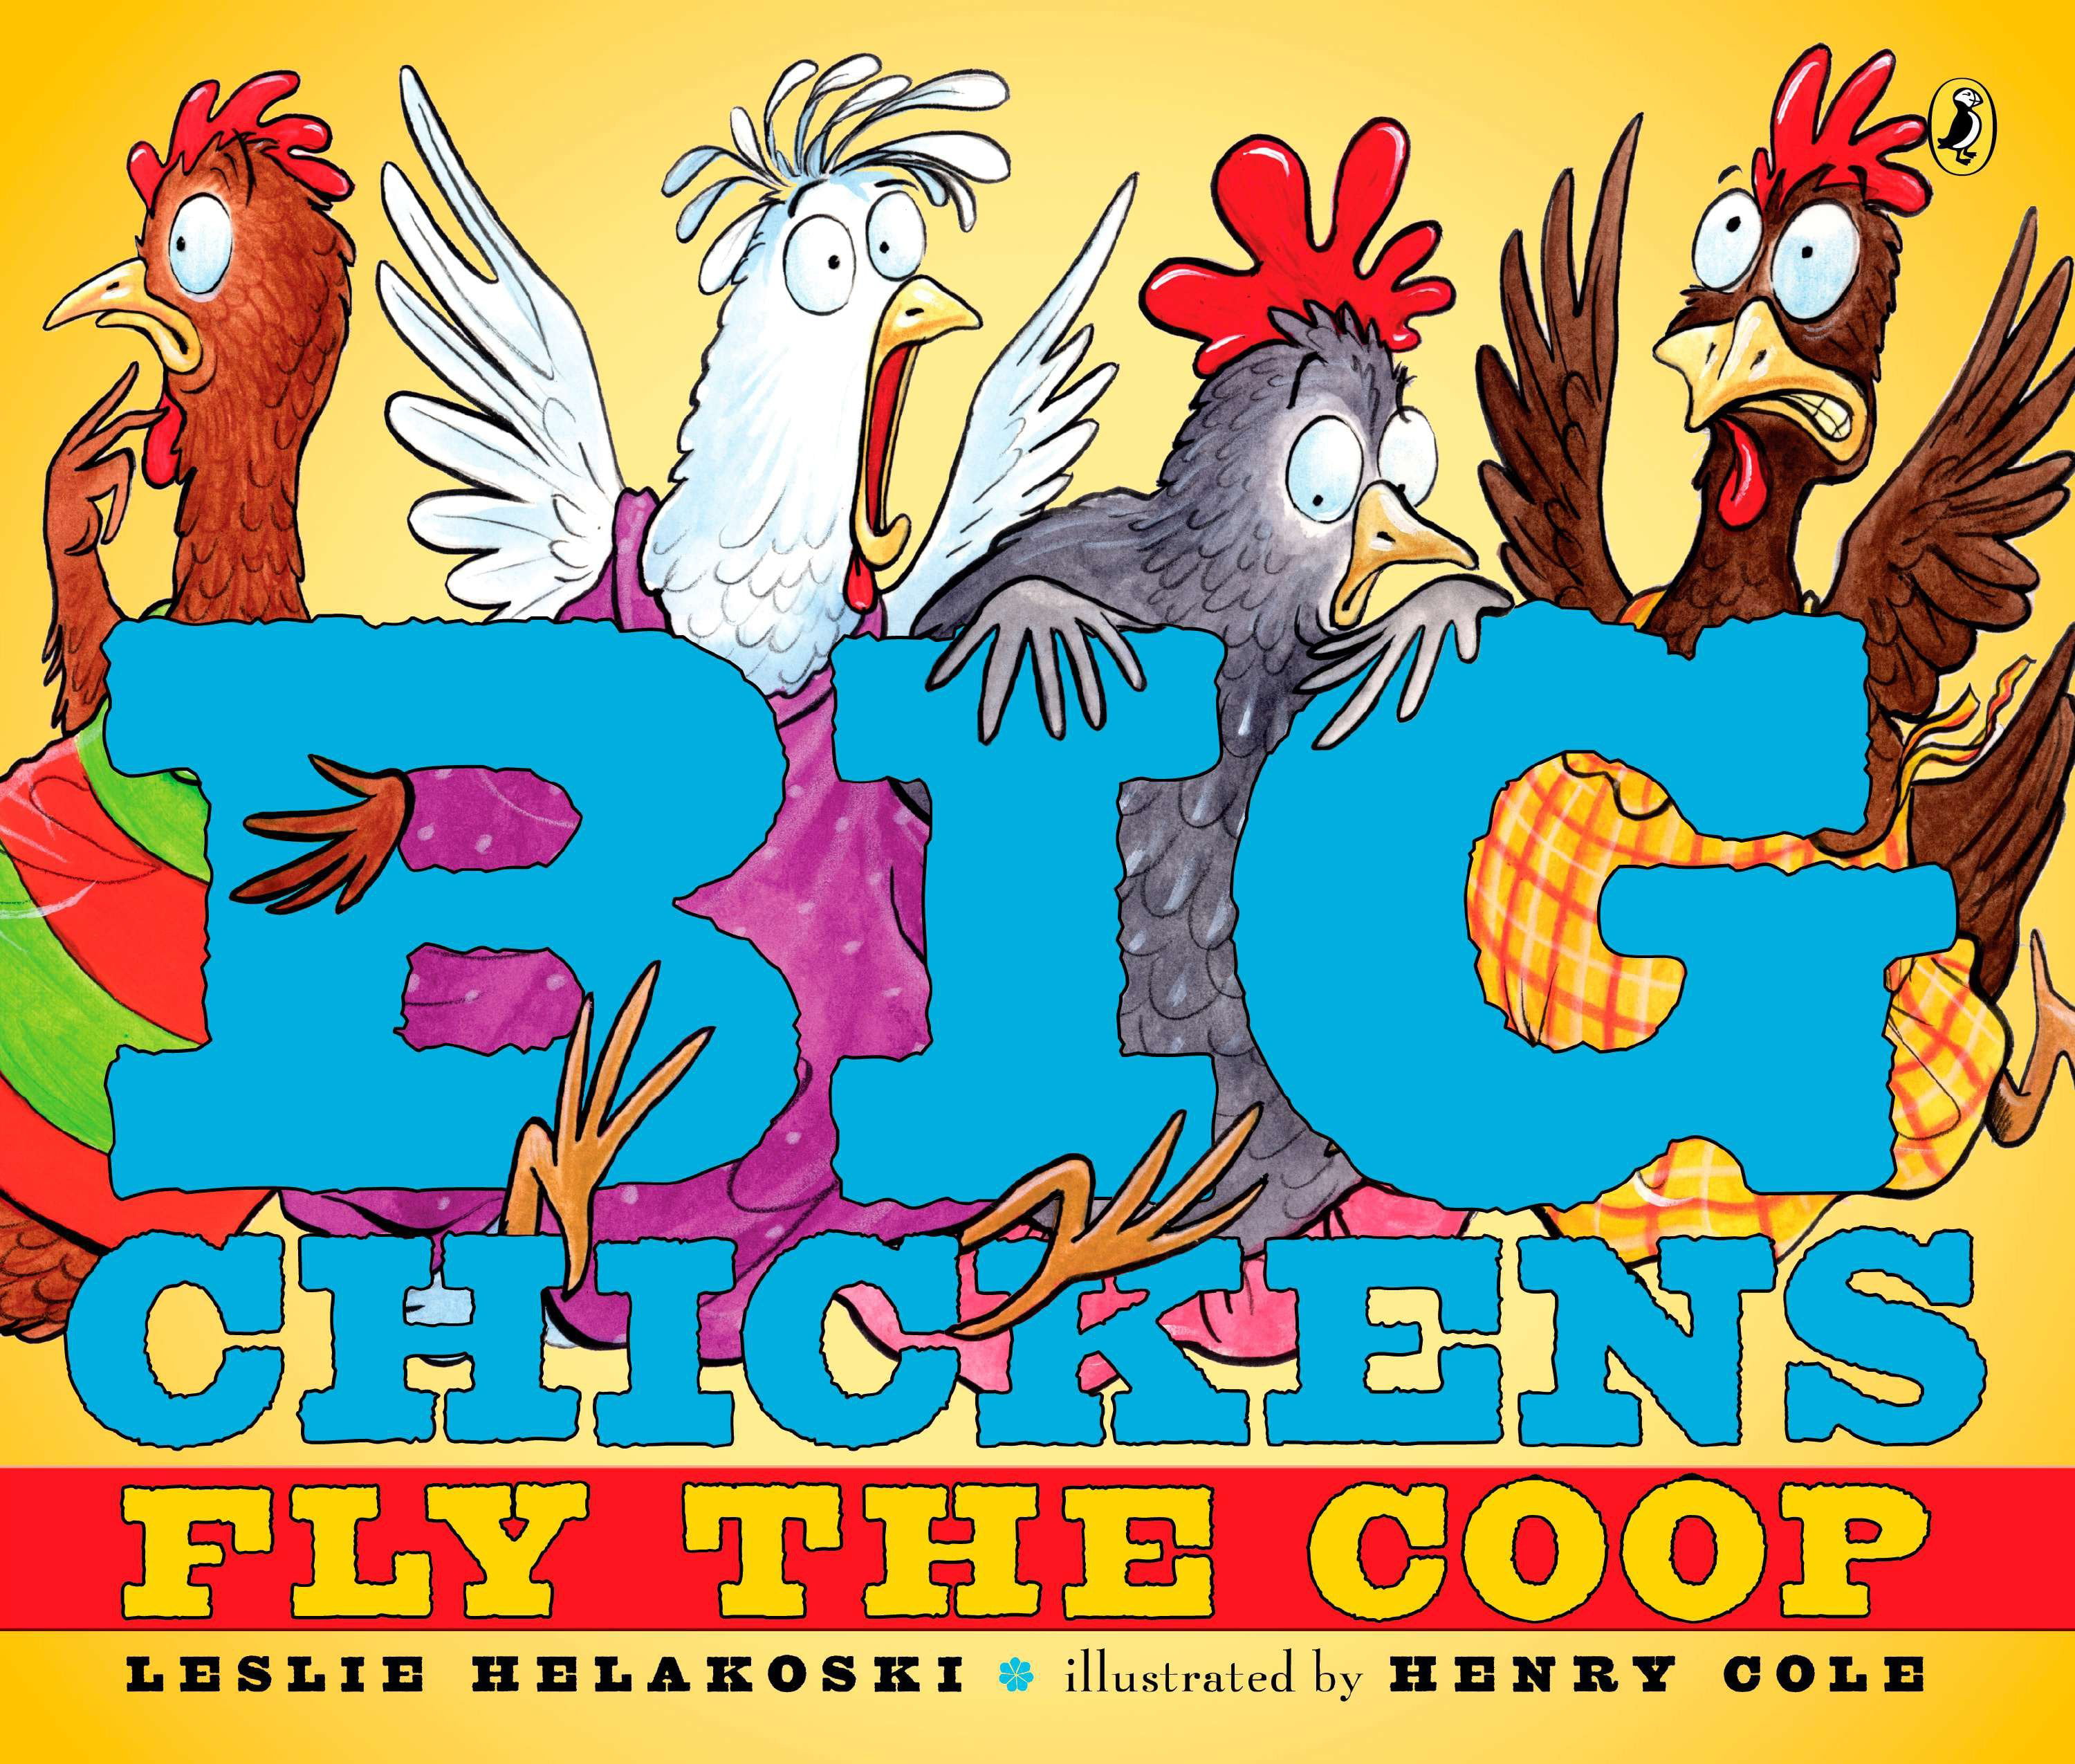 Chicken fly. Fly the Coop. Are Chickens big. It's a big Chicken.